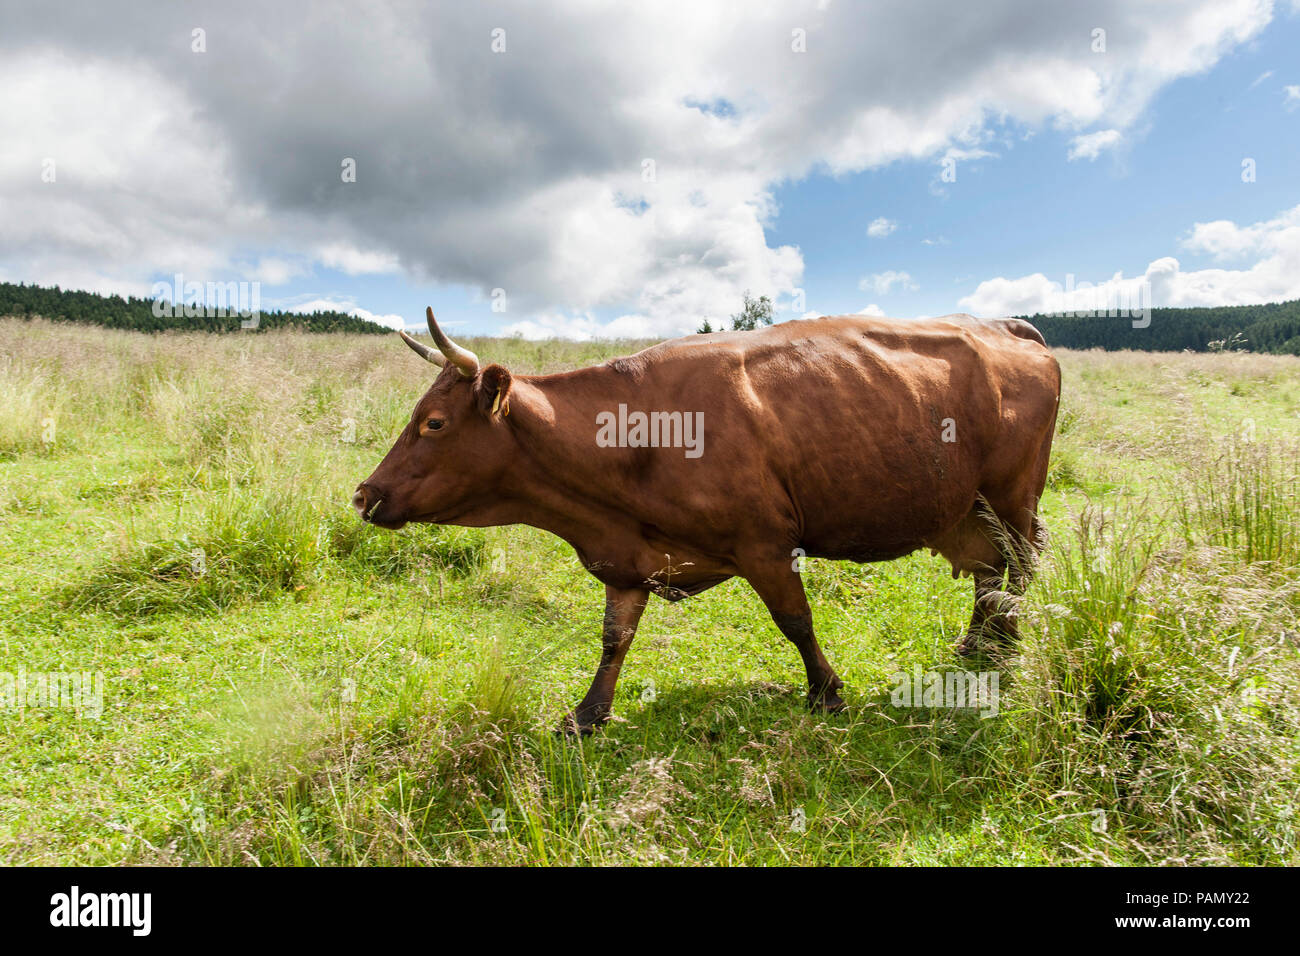 Harzer Rotvieh. Cow walking on a pasture. Germany. Stock Photo